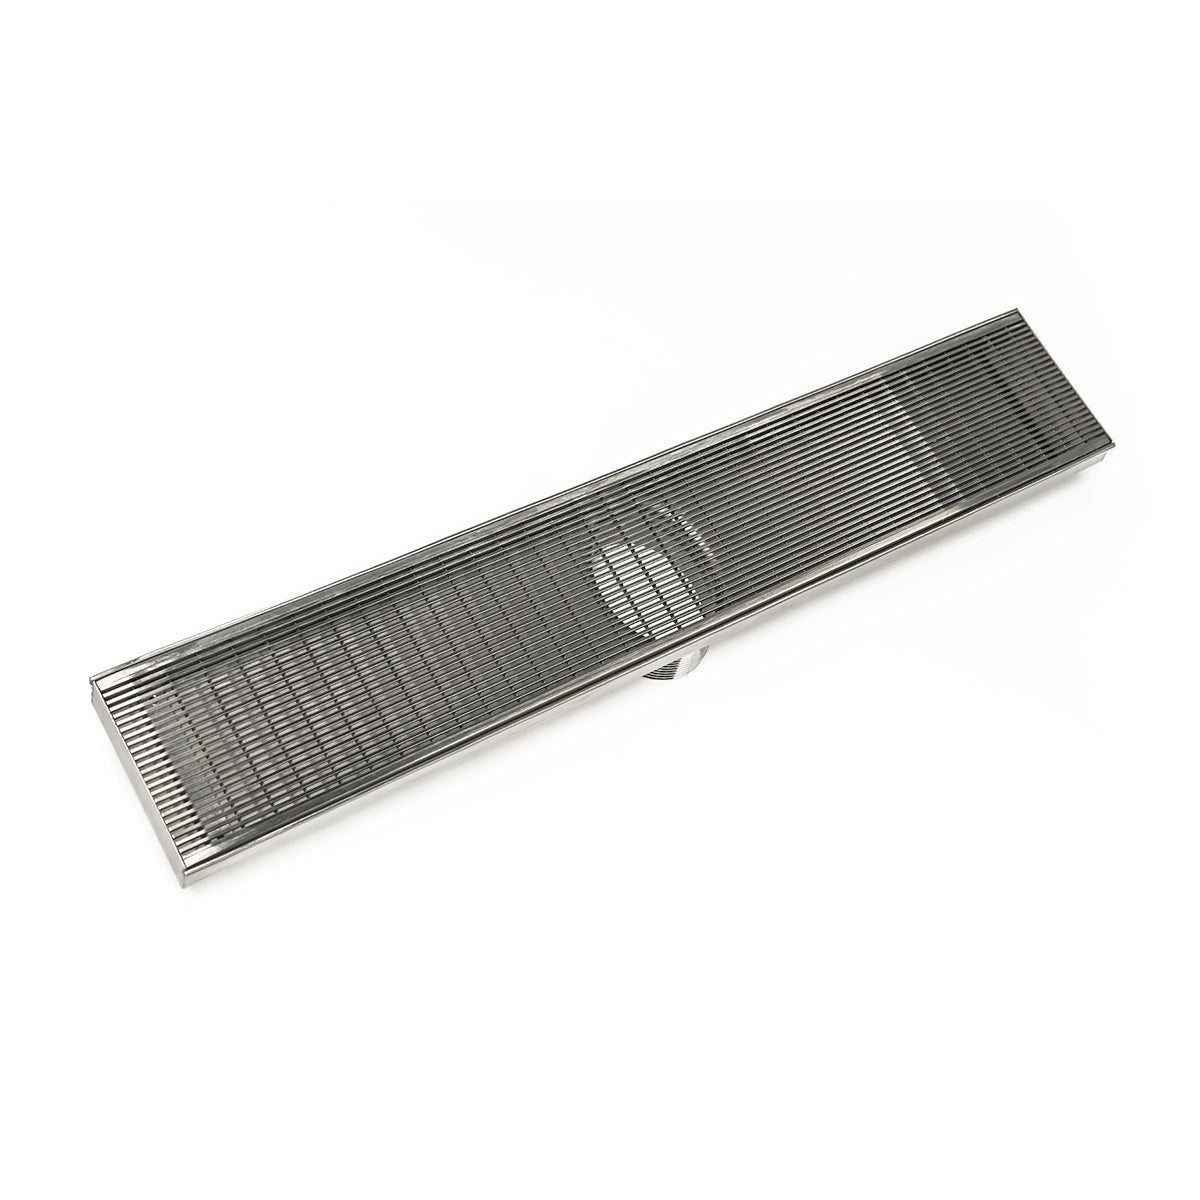 Infinity Drain 60" FX Series High Flow Fixed Length Linear Drain Kit with Wedge Wire Grate with Cast Iron Drain Body